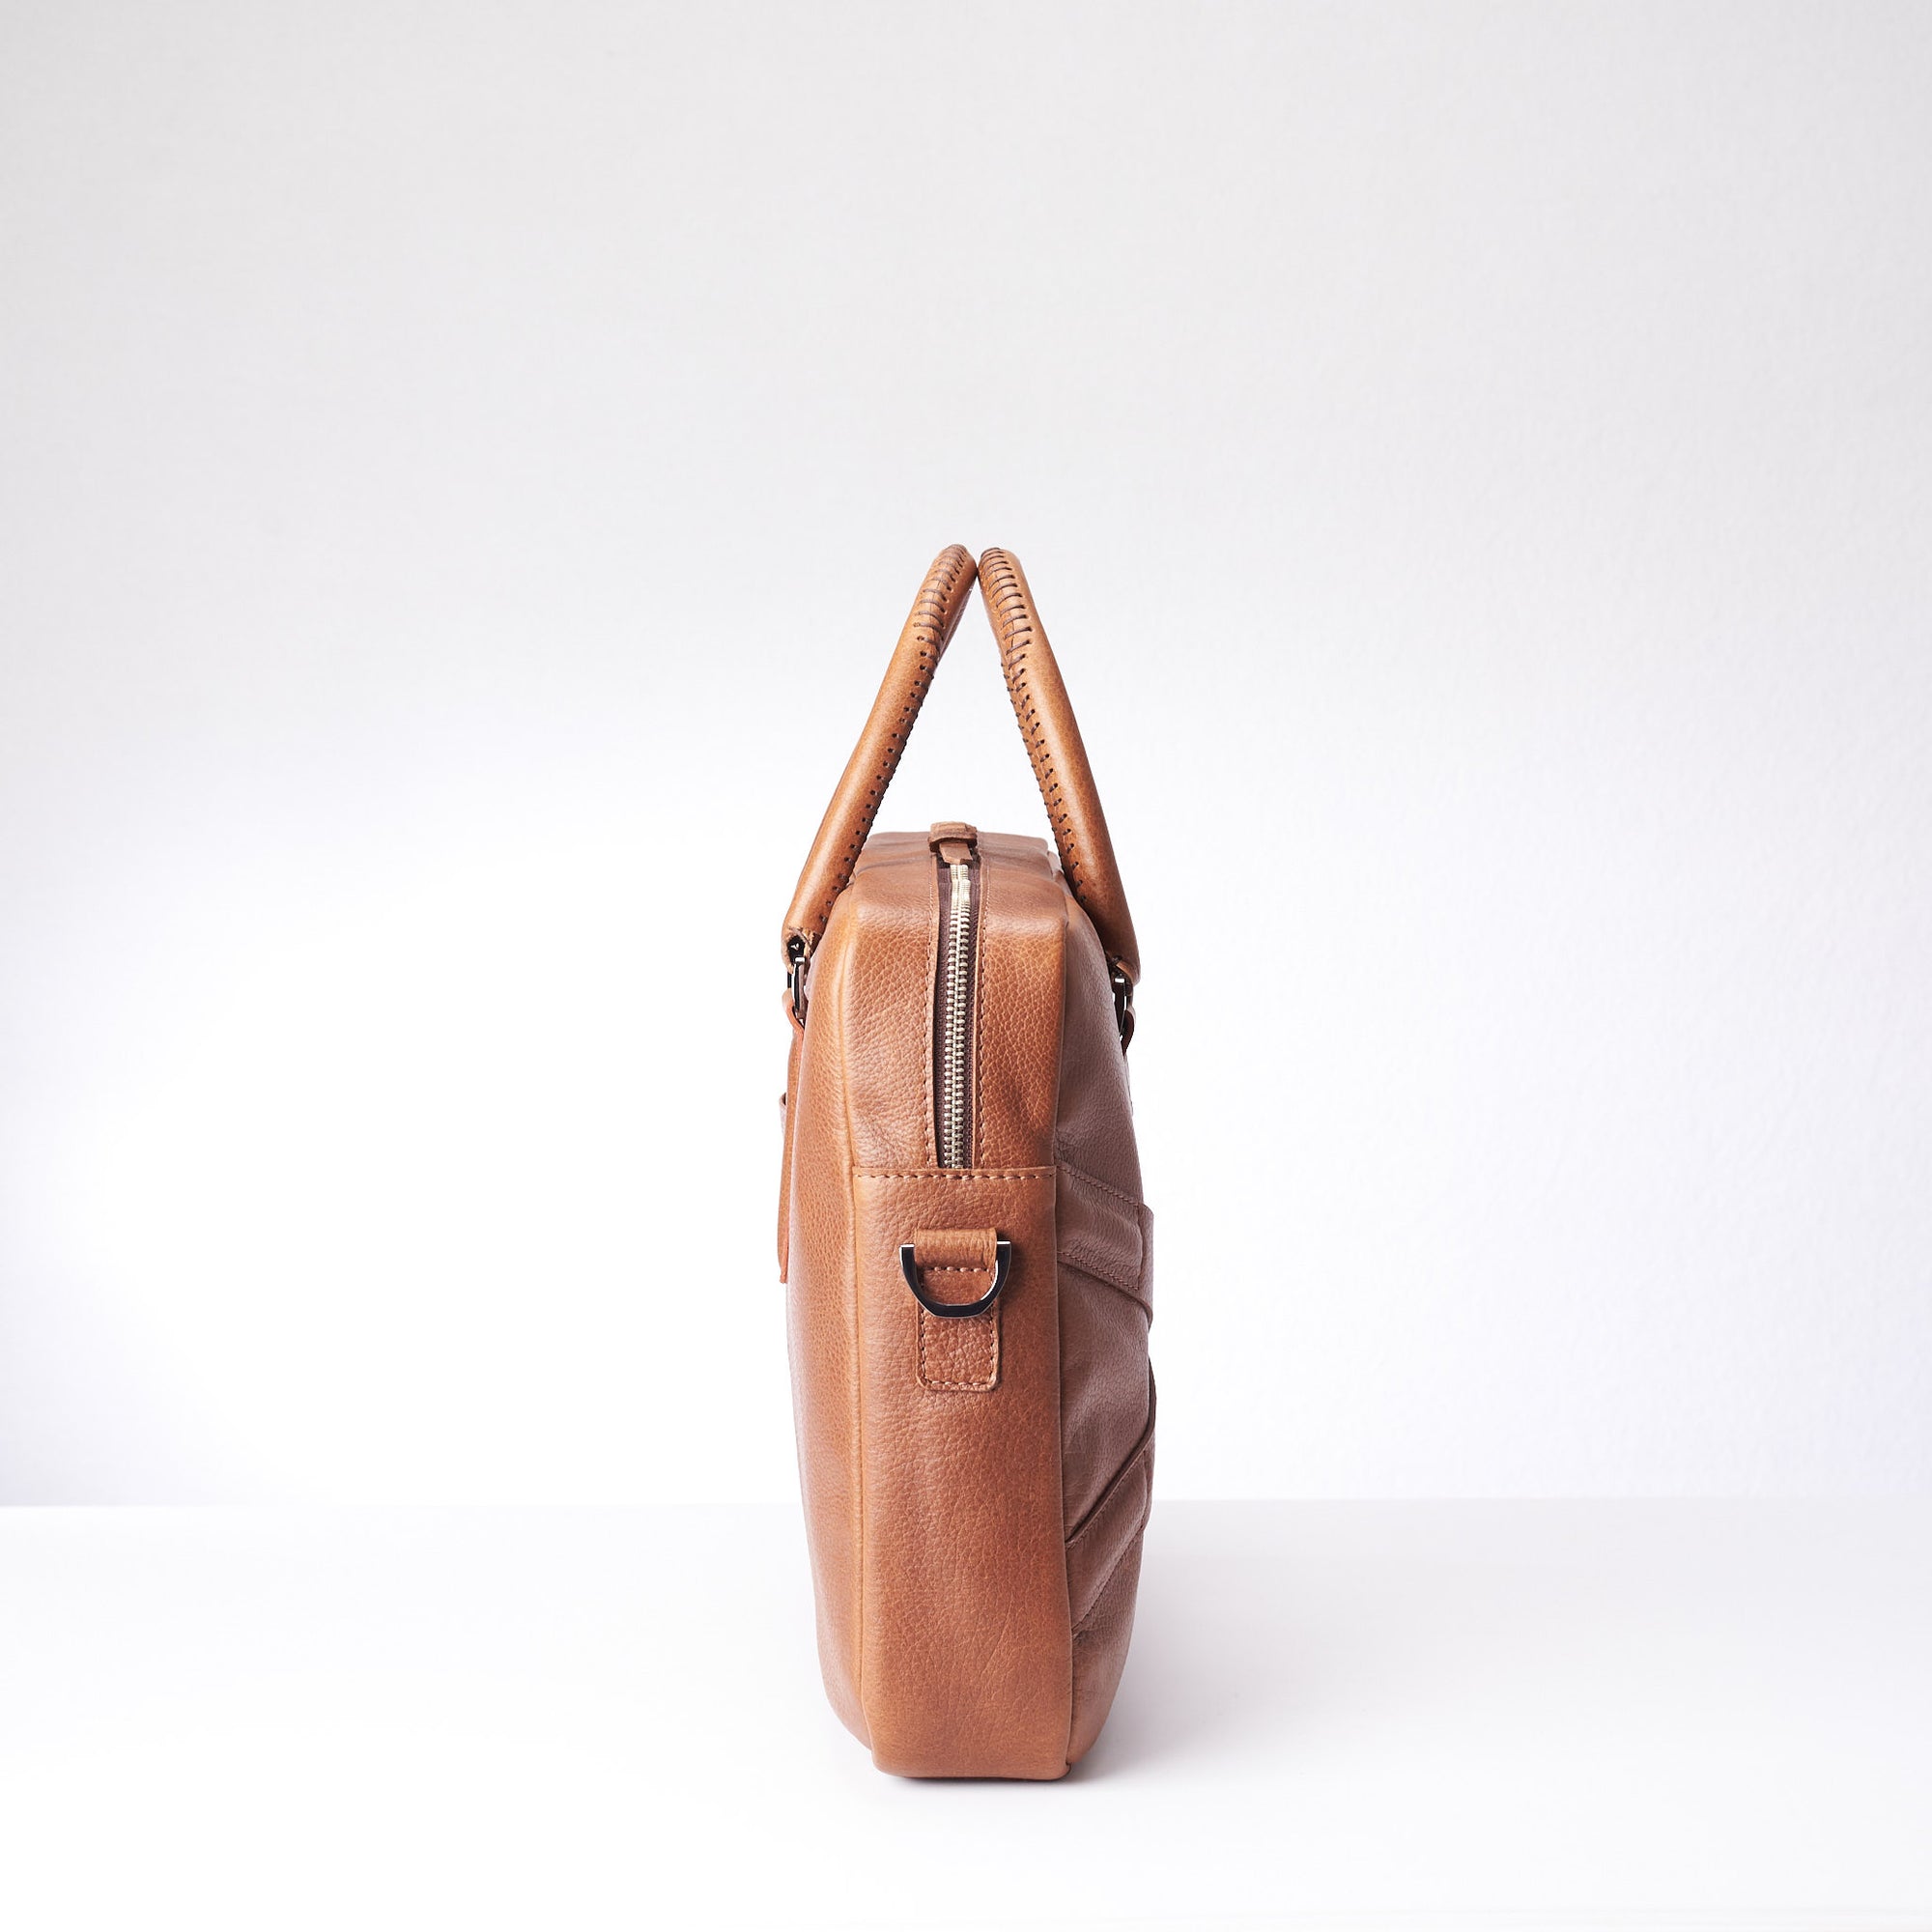 Side view of soft office and workbag .Tan leather briefcase laptop bag for men. Gazeli laptop briefcase by Capra Leather.